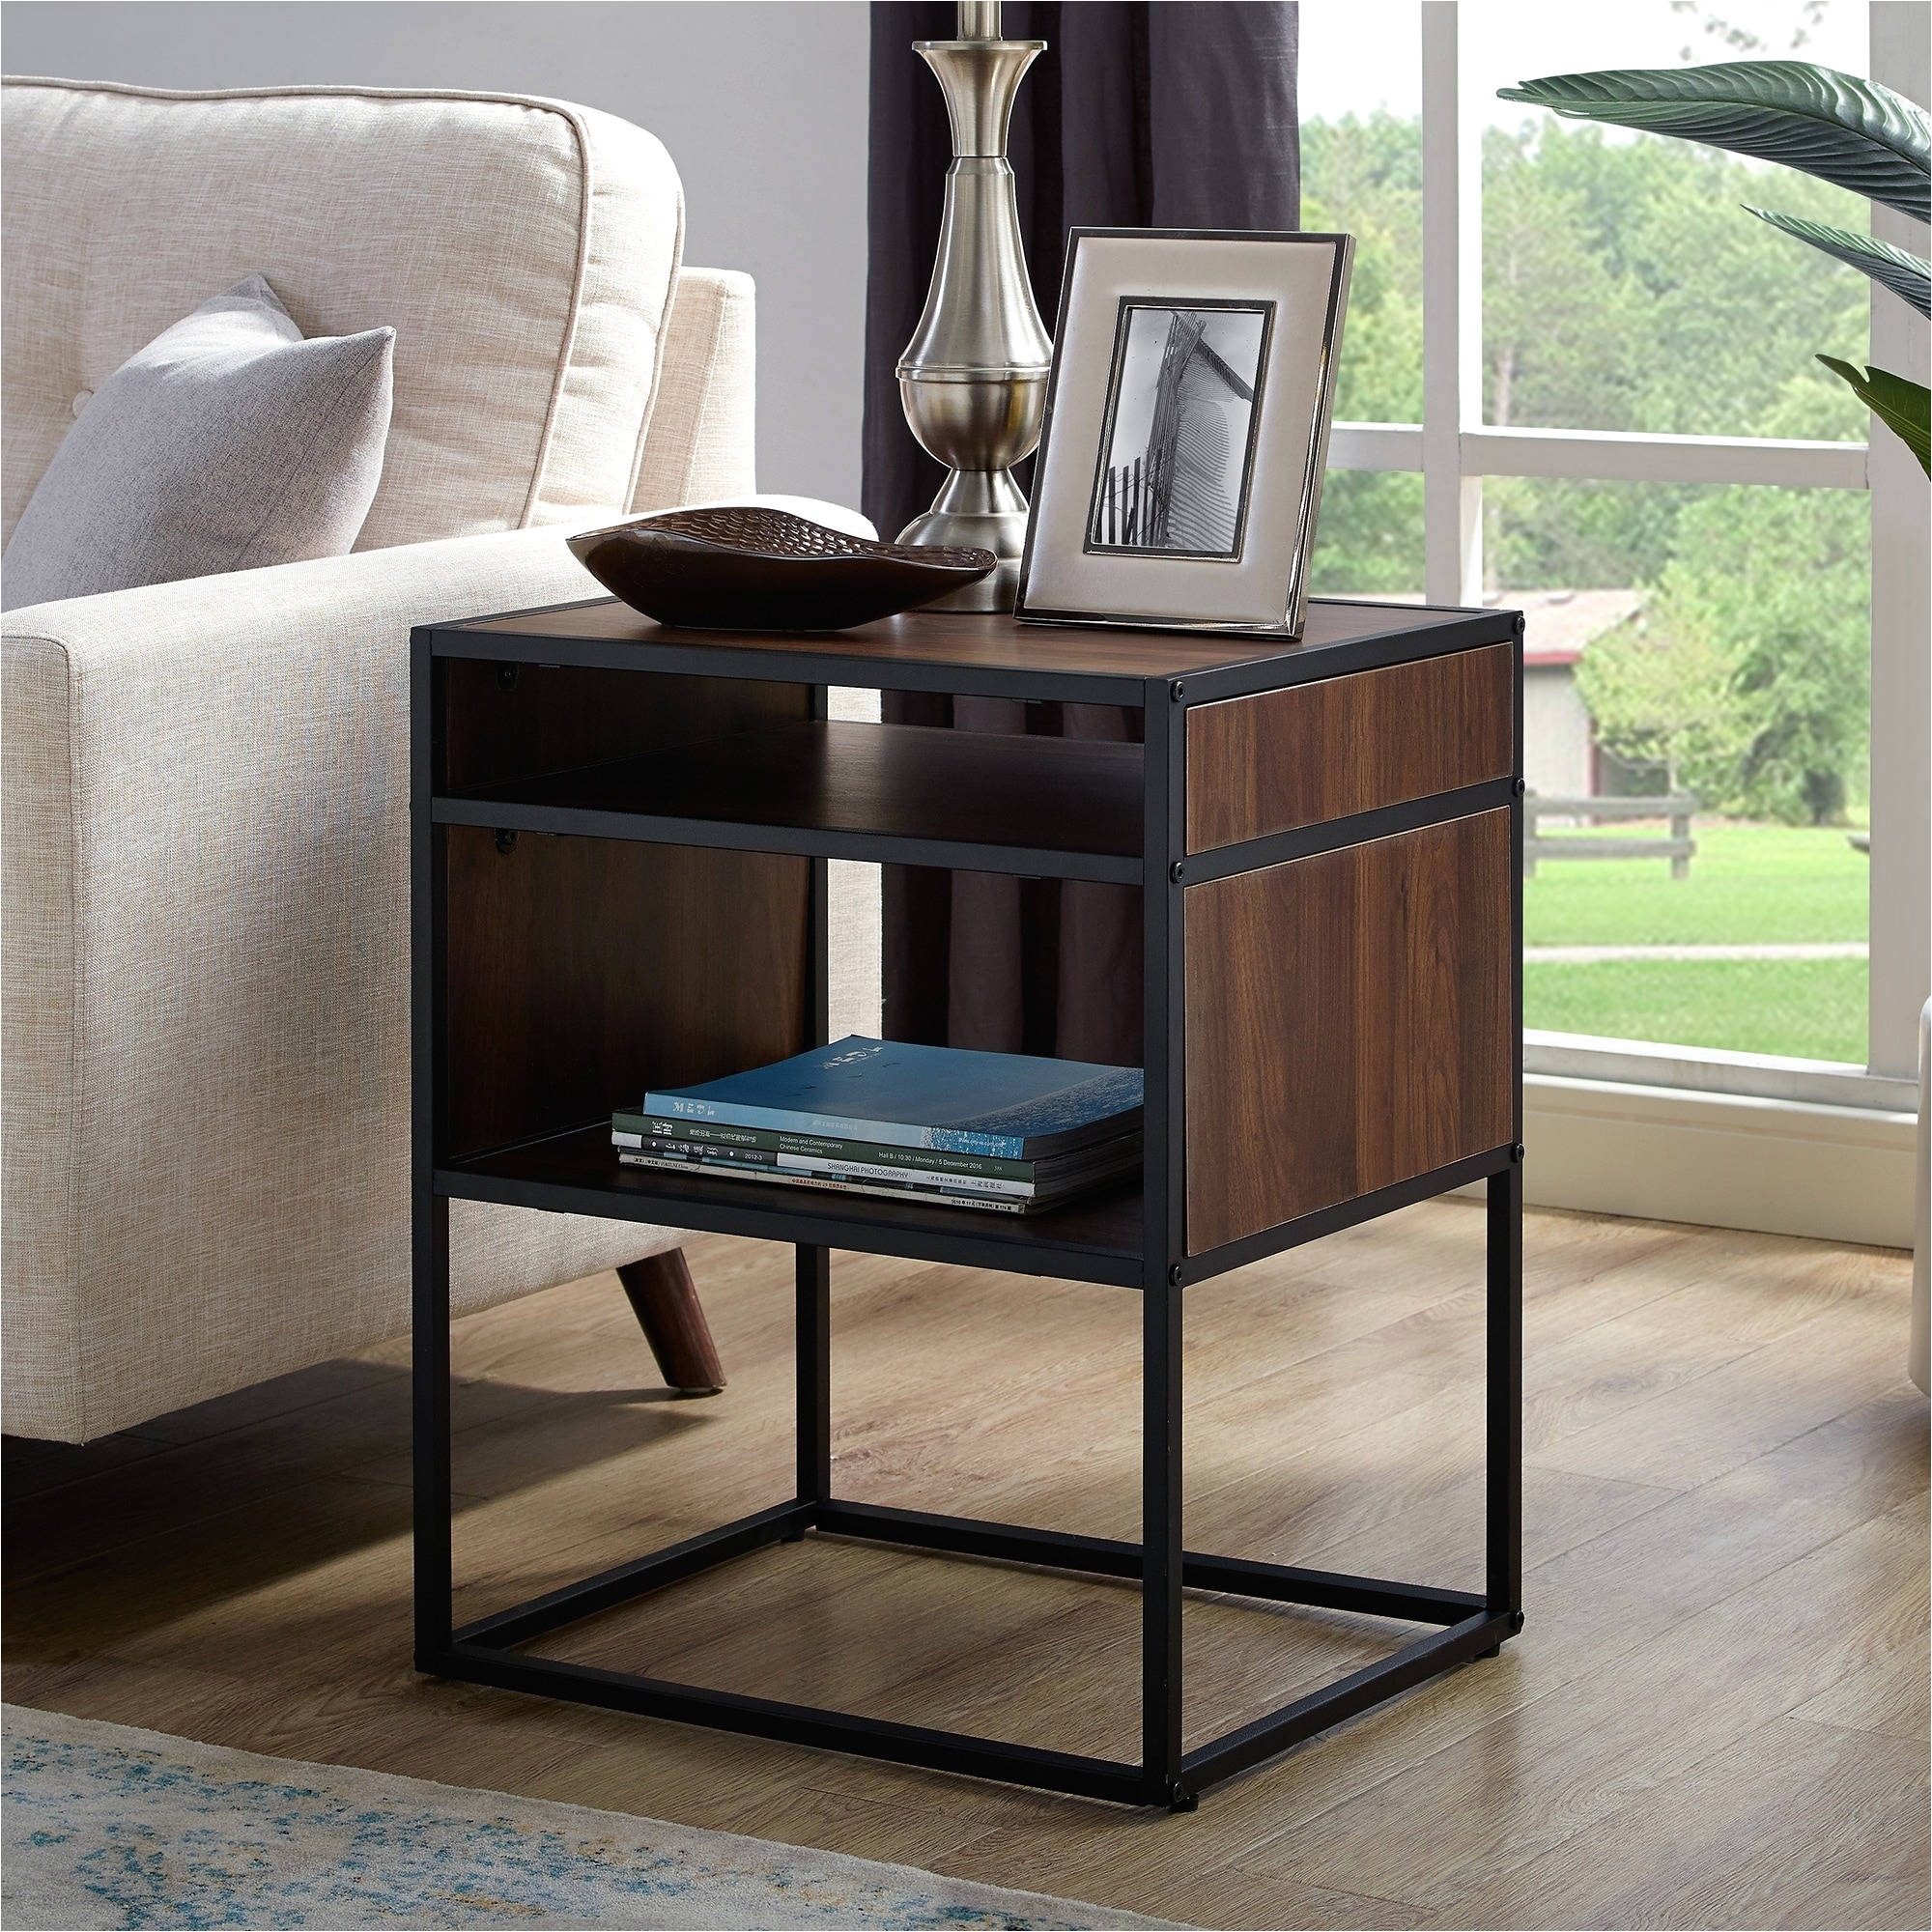 Mango Wood Coffee Table Mango Wood Coffee Table with Storage Awesome 17 About Coffee Tables